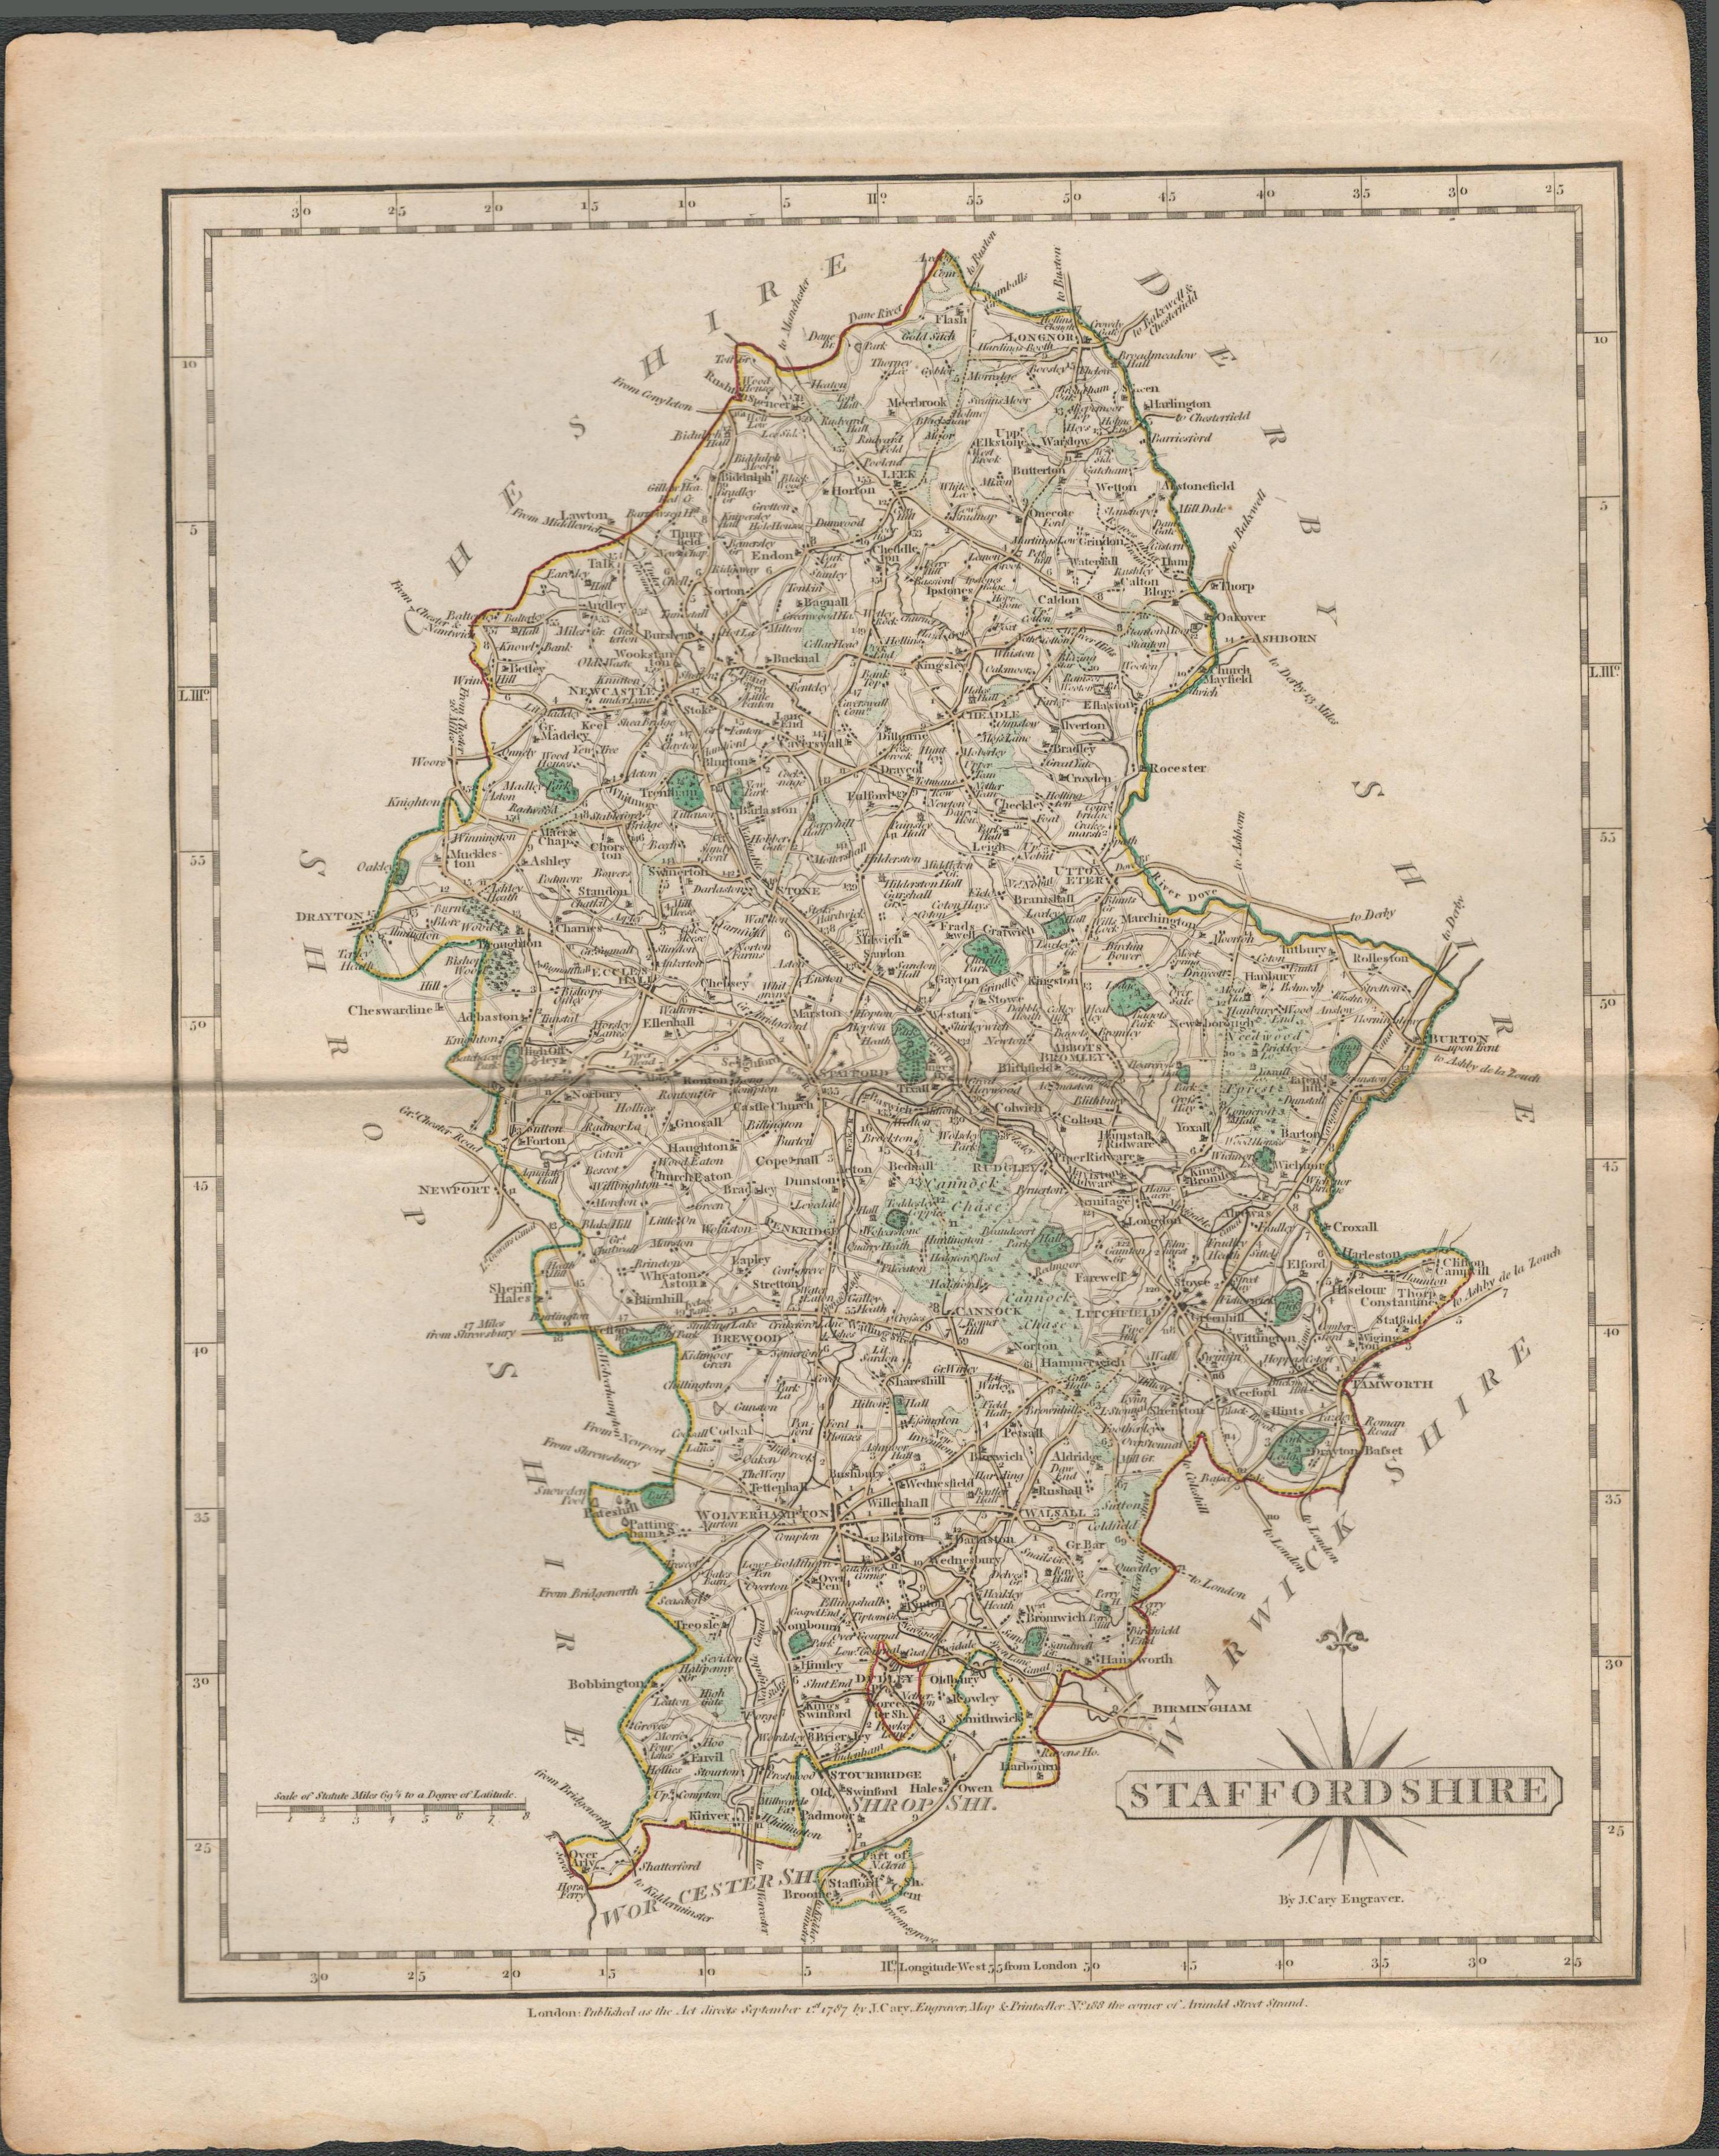 Staffordshire John Cary’s 1787 Antique Hand Coloured Map.